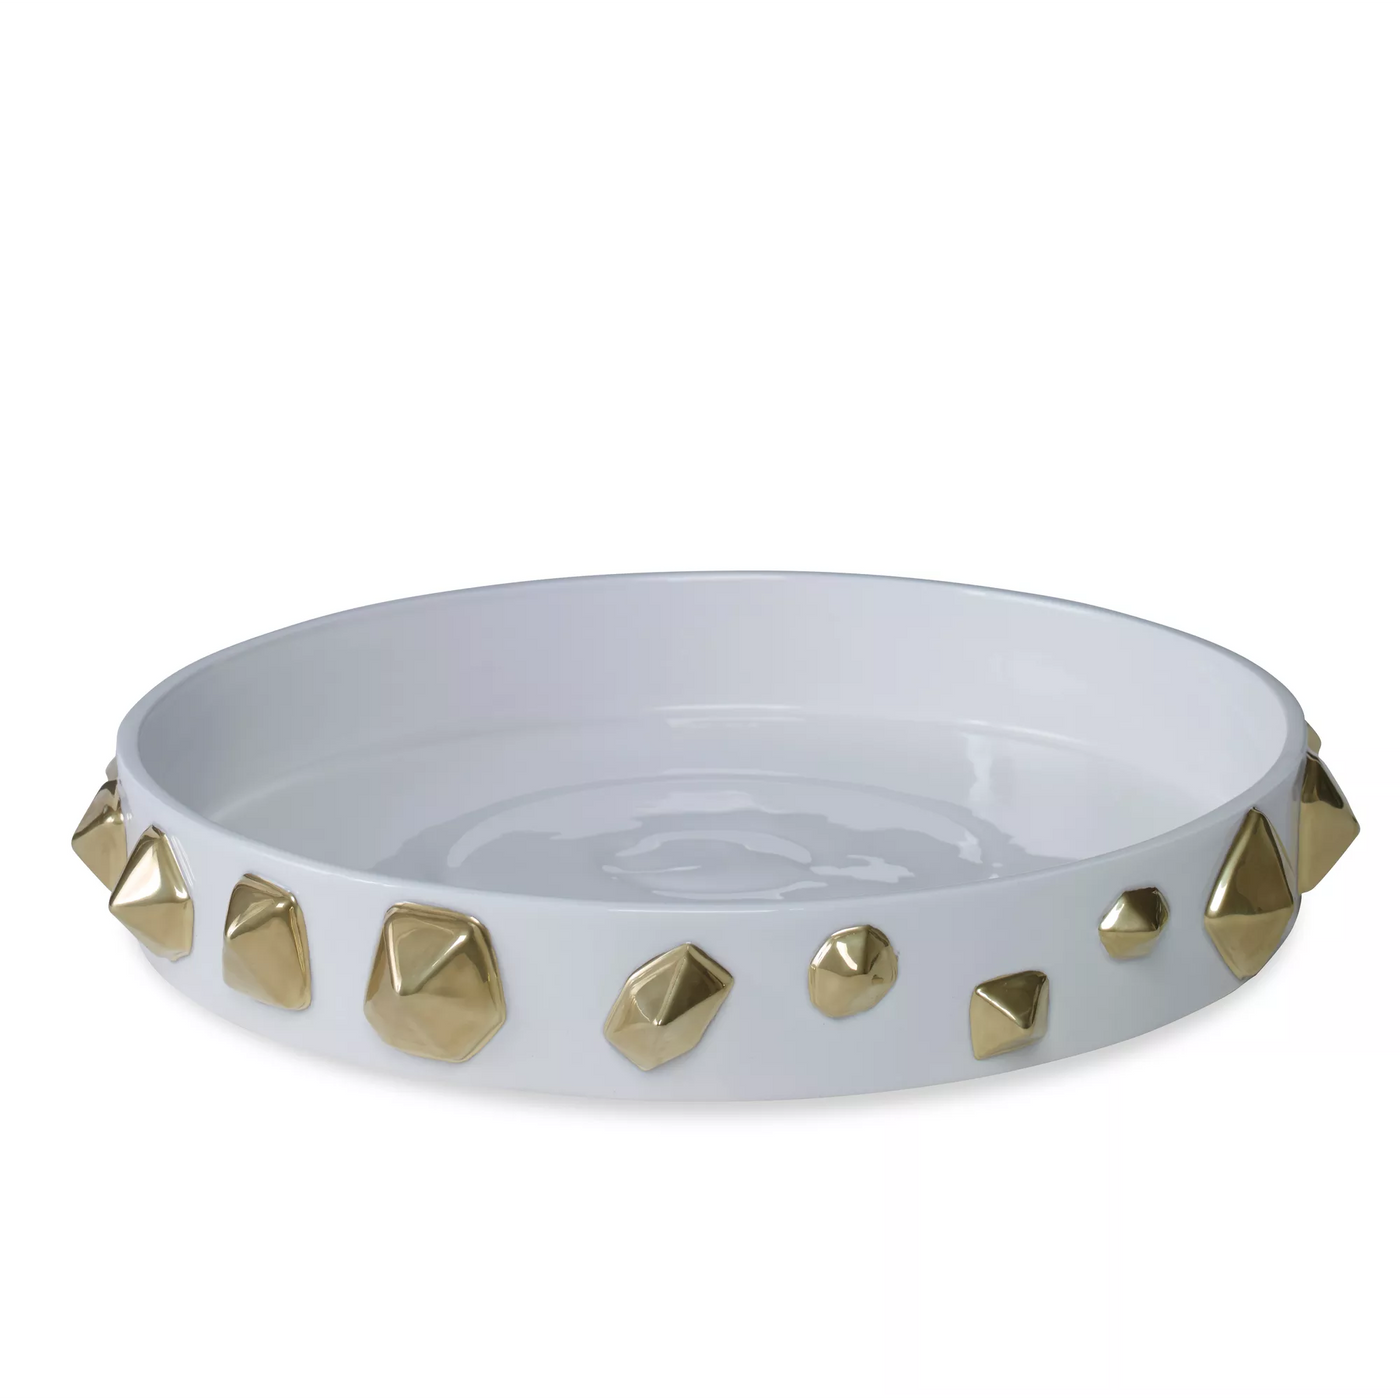 BOWL WHITE WITH GOLD SHAPES